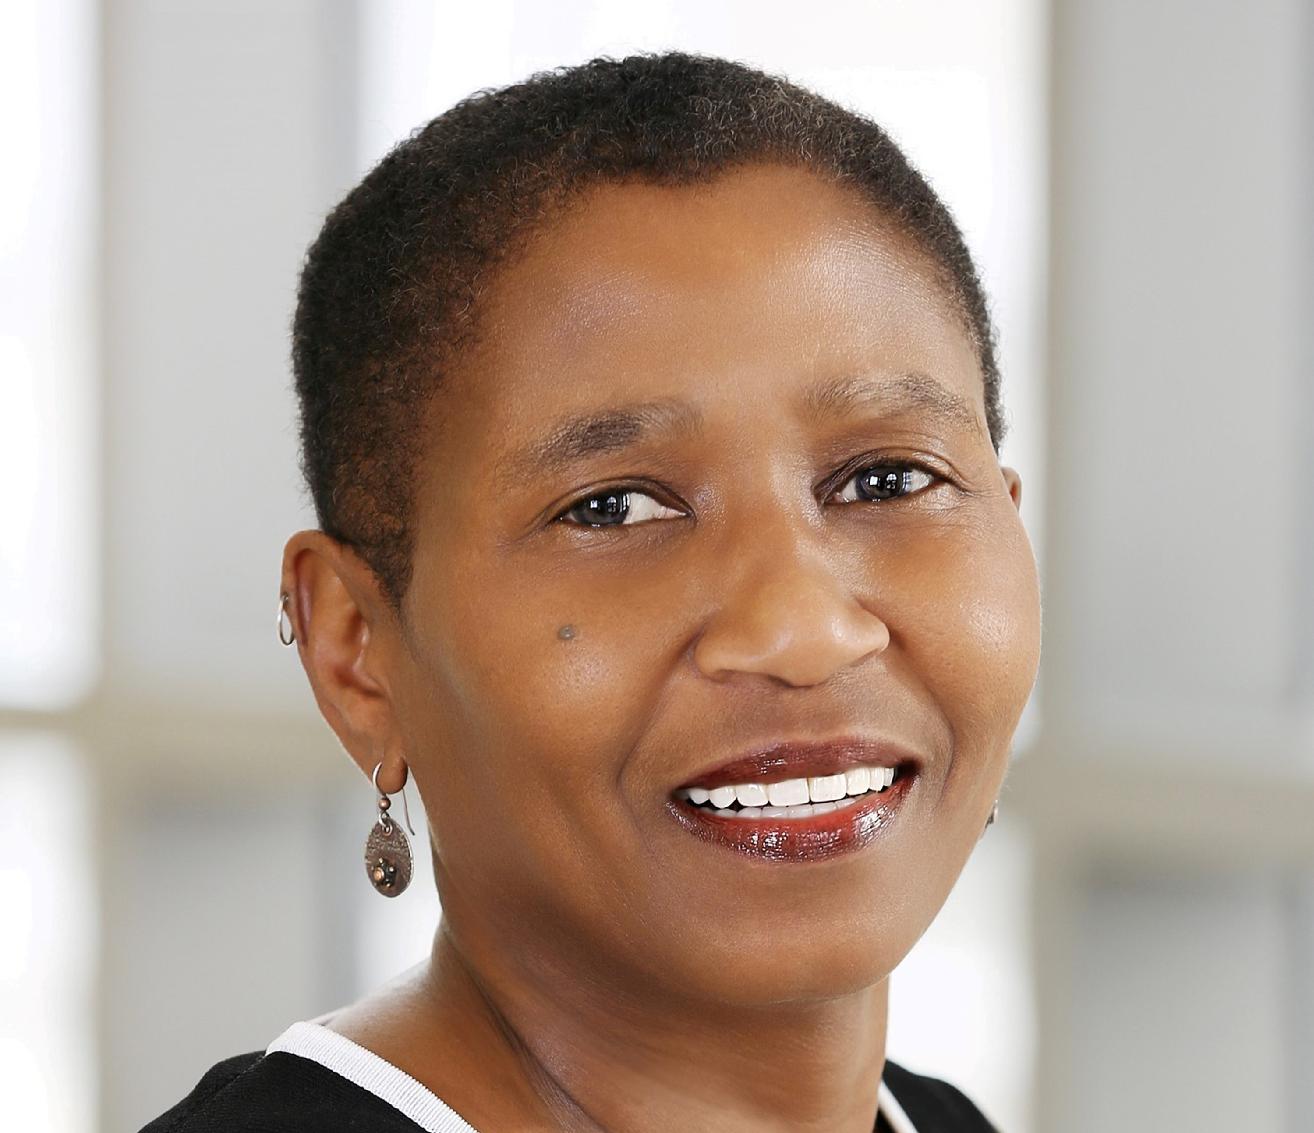 NBPA boss Michele Roberts expressed concern about cap smoothing's long-term consequences. (AP)